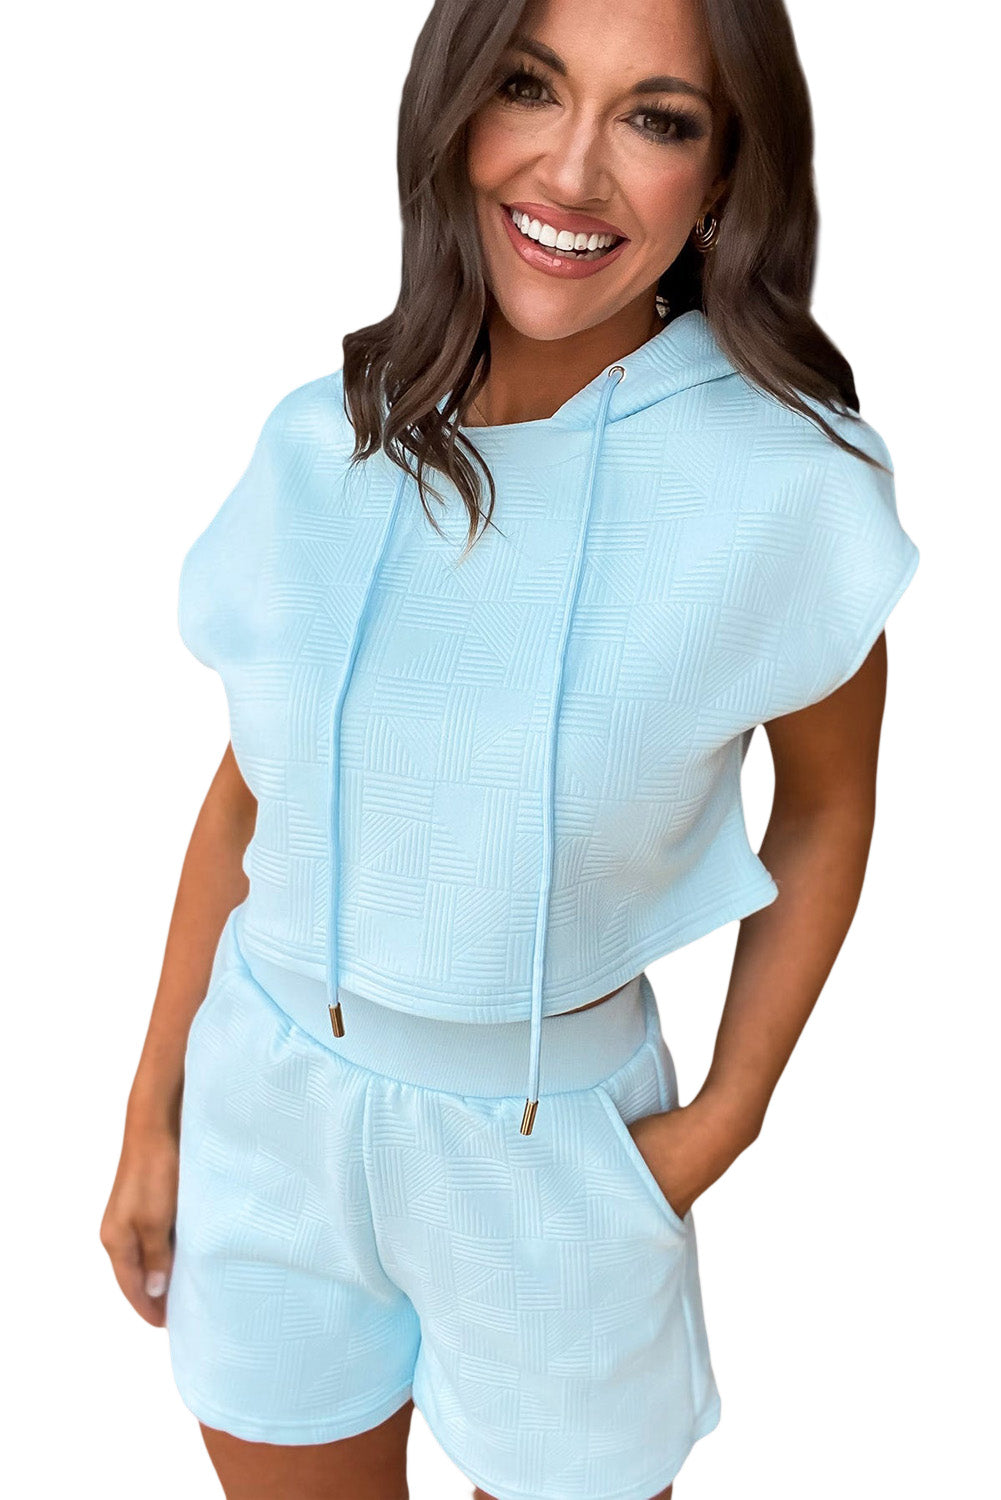 Beau Blue Textured Cropped Drawstring Hoodie and Shorts Set